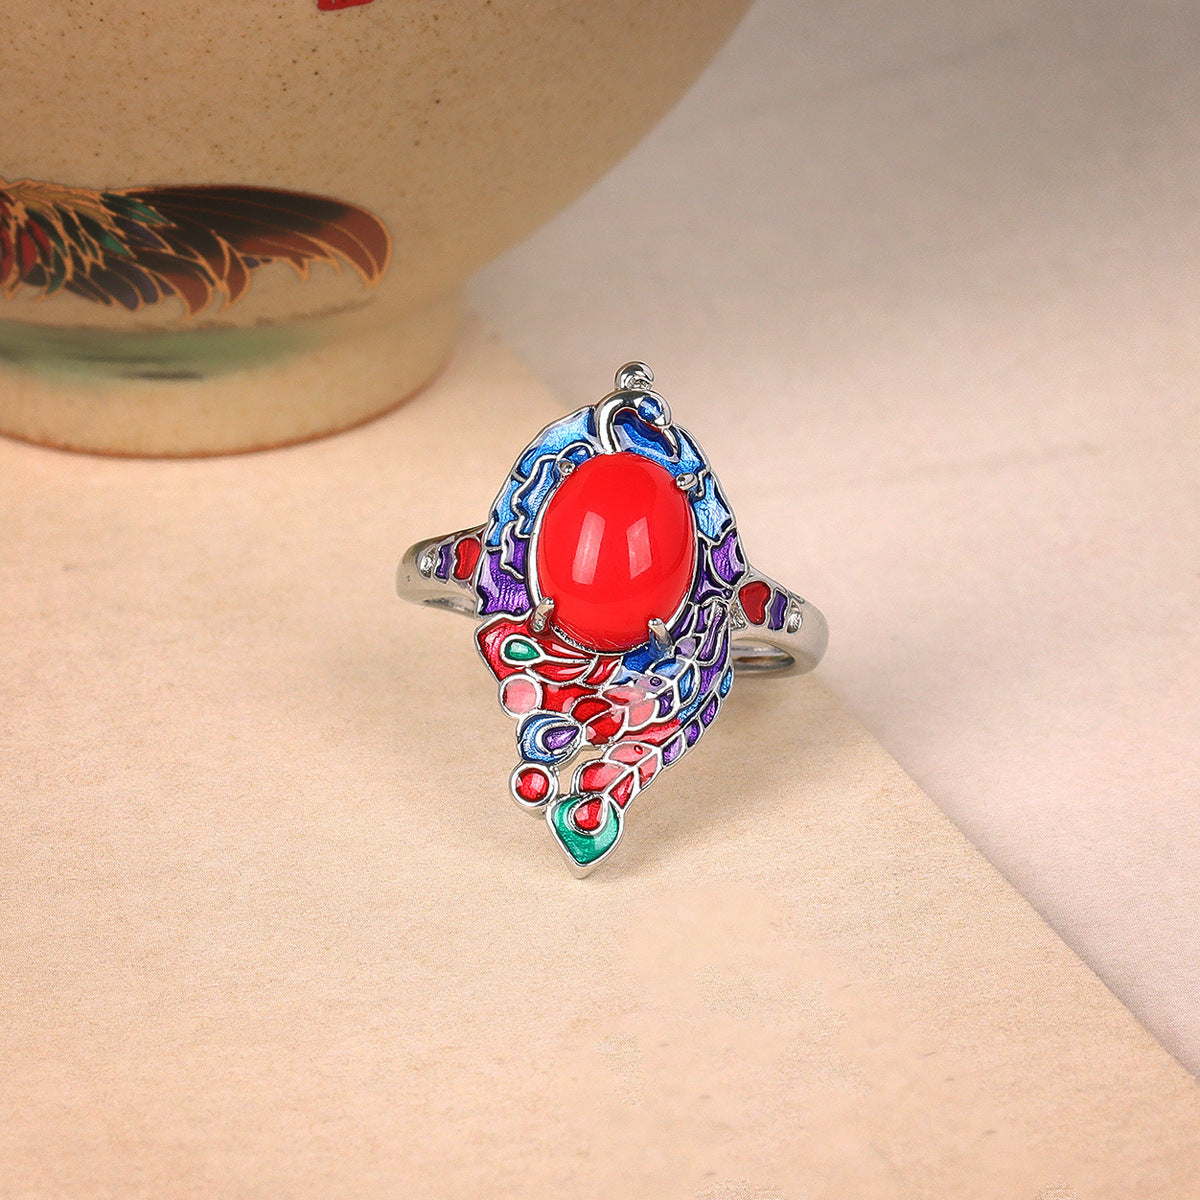 China-Chic Cloisonné phoenix imitation southern red ring